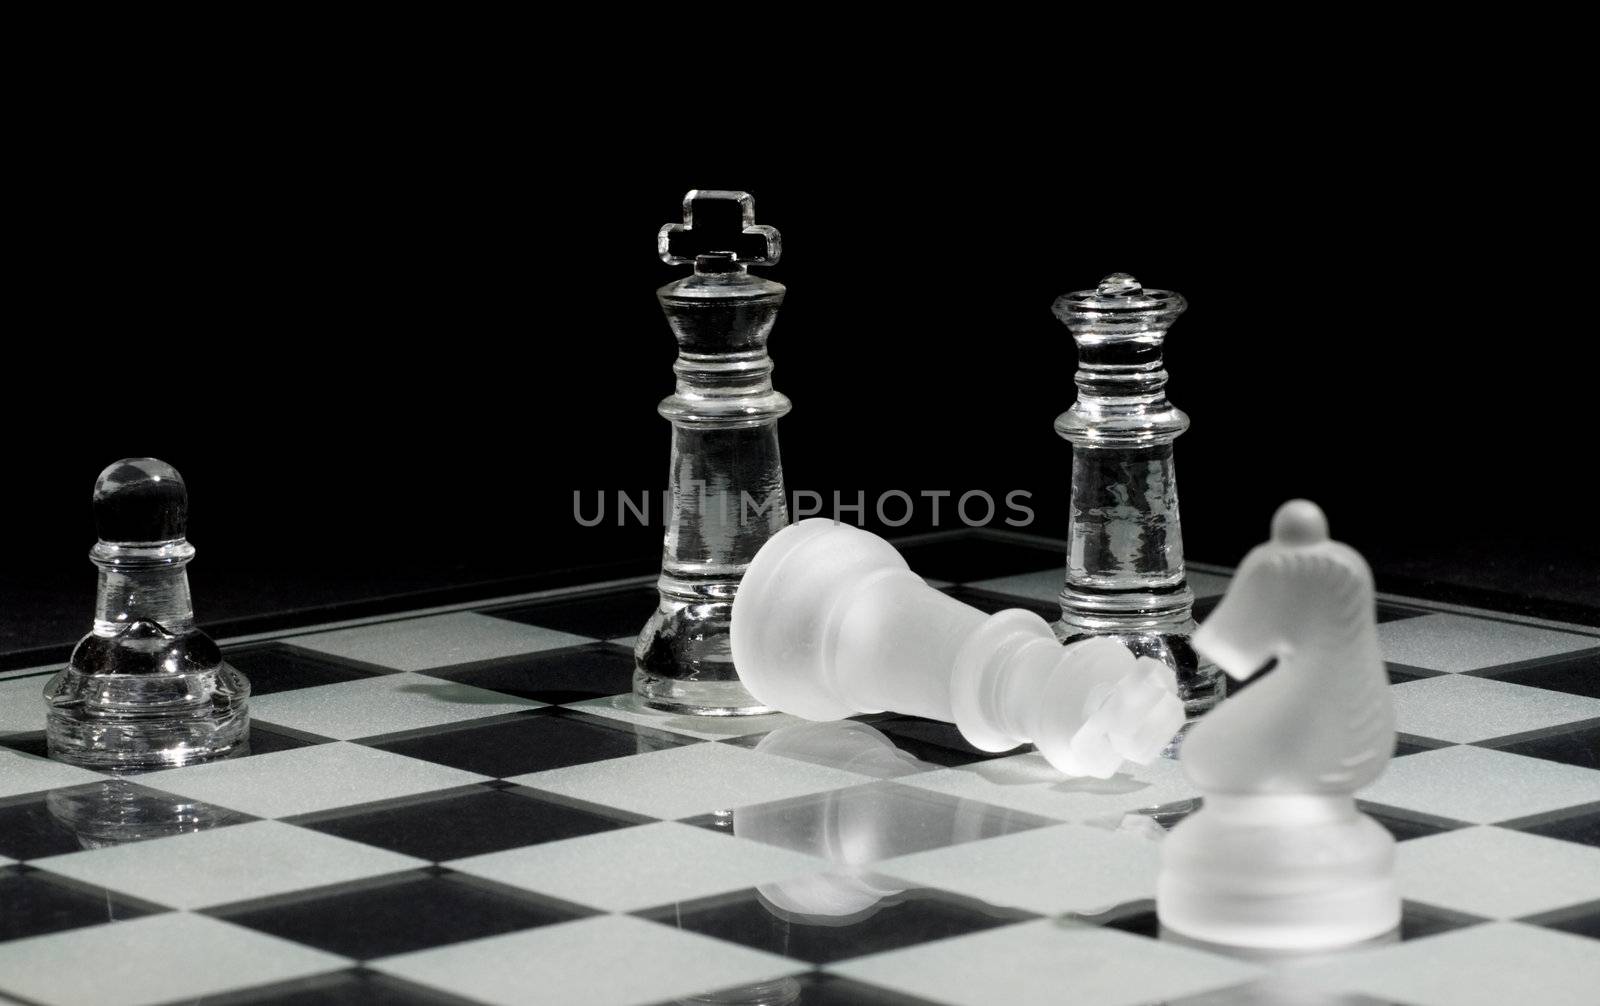 Final pieces in a chess game – Checkmate. Selective focus on down king.